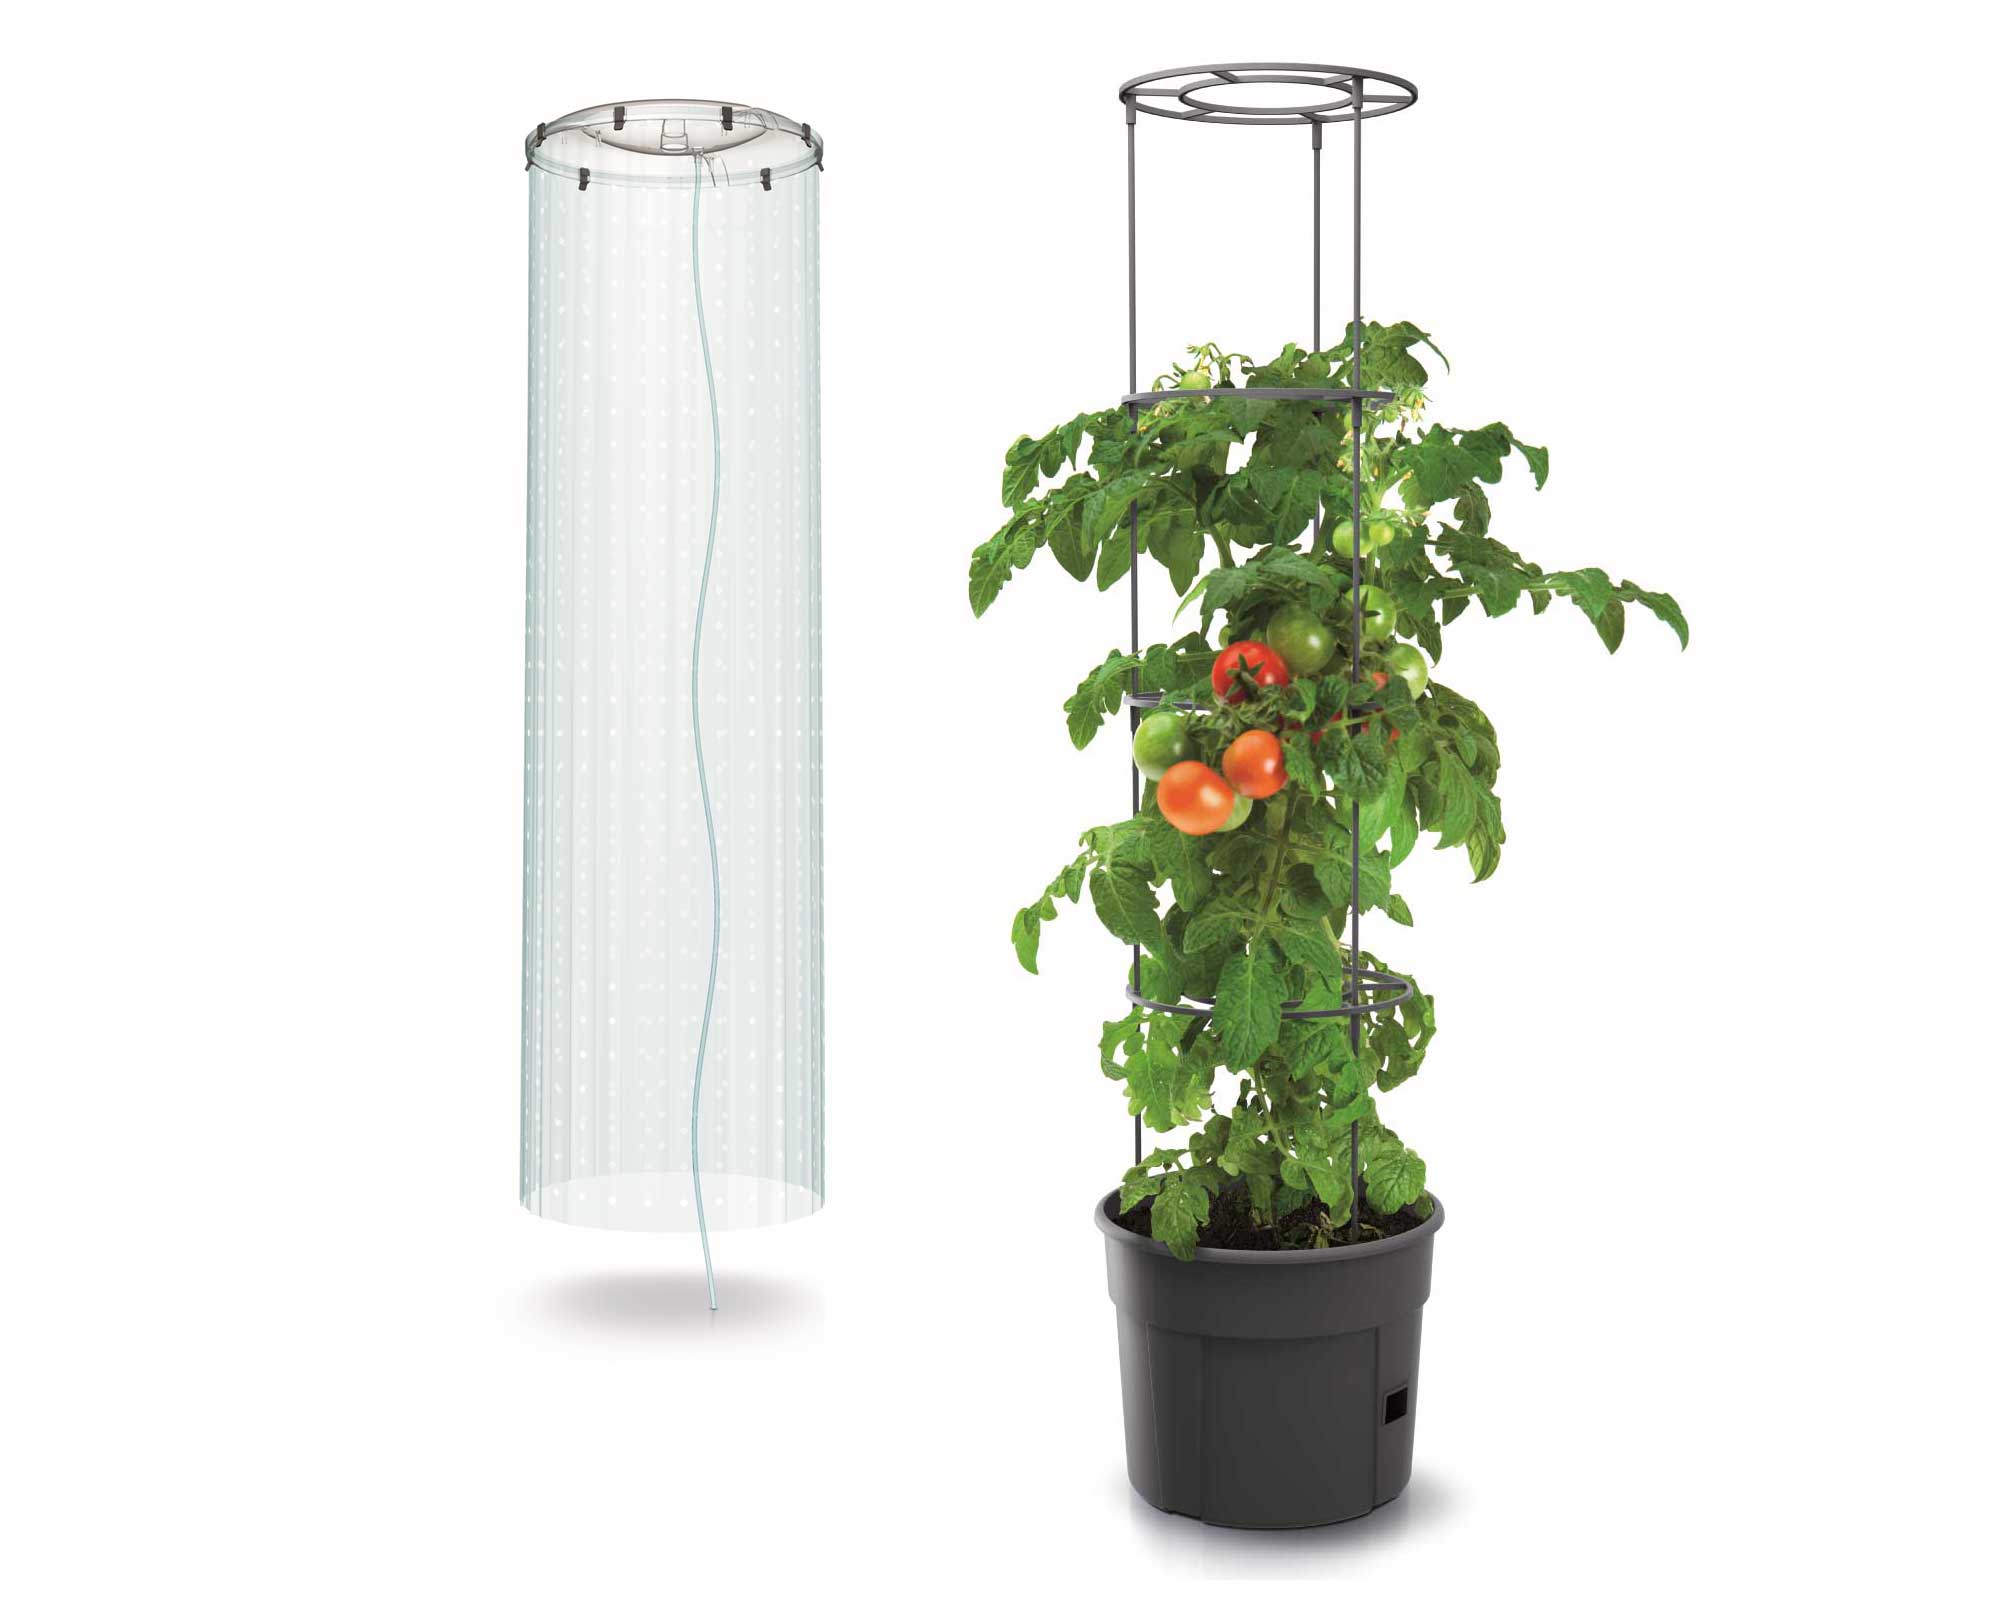 Protector Slips Over The Stand To Protect Your Plant